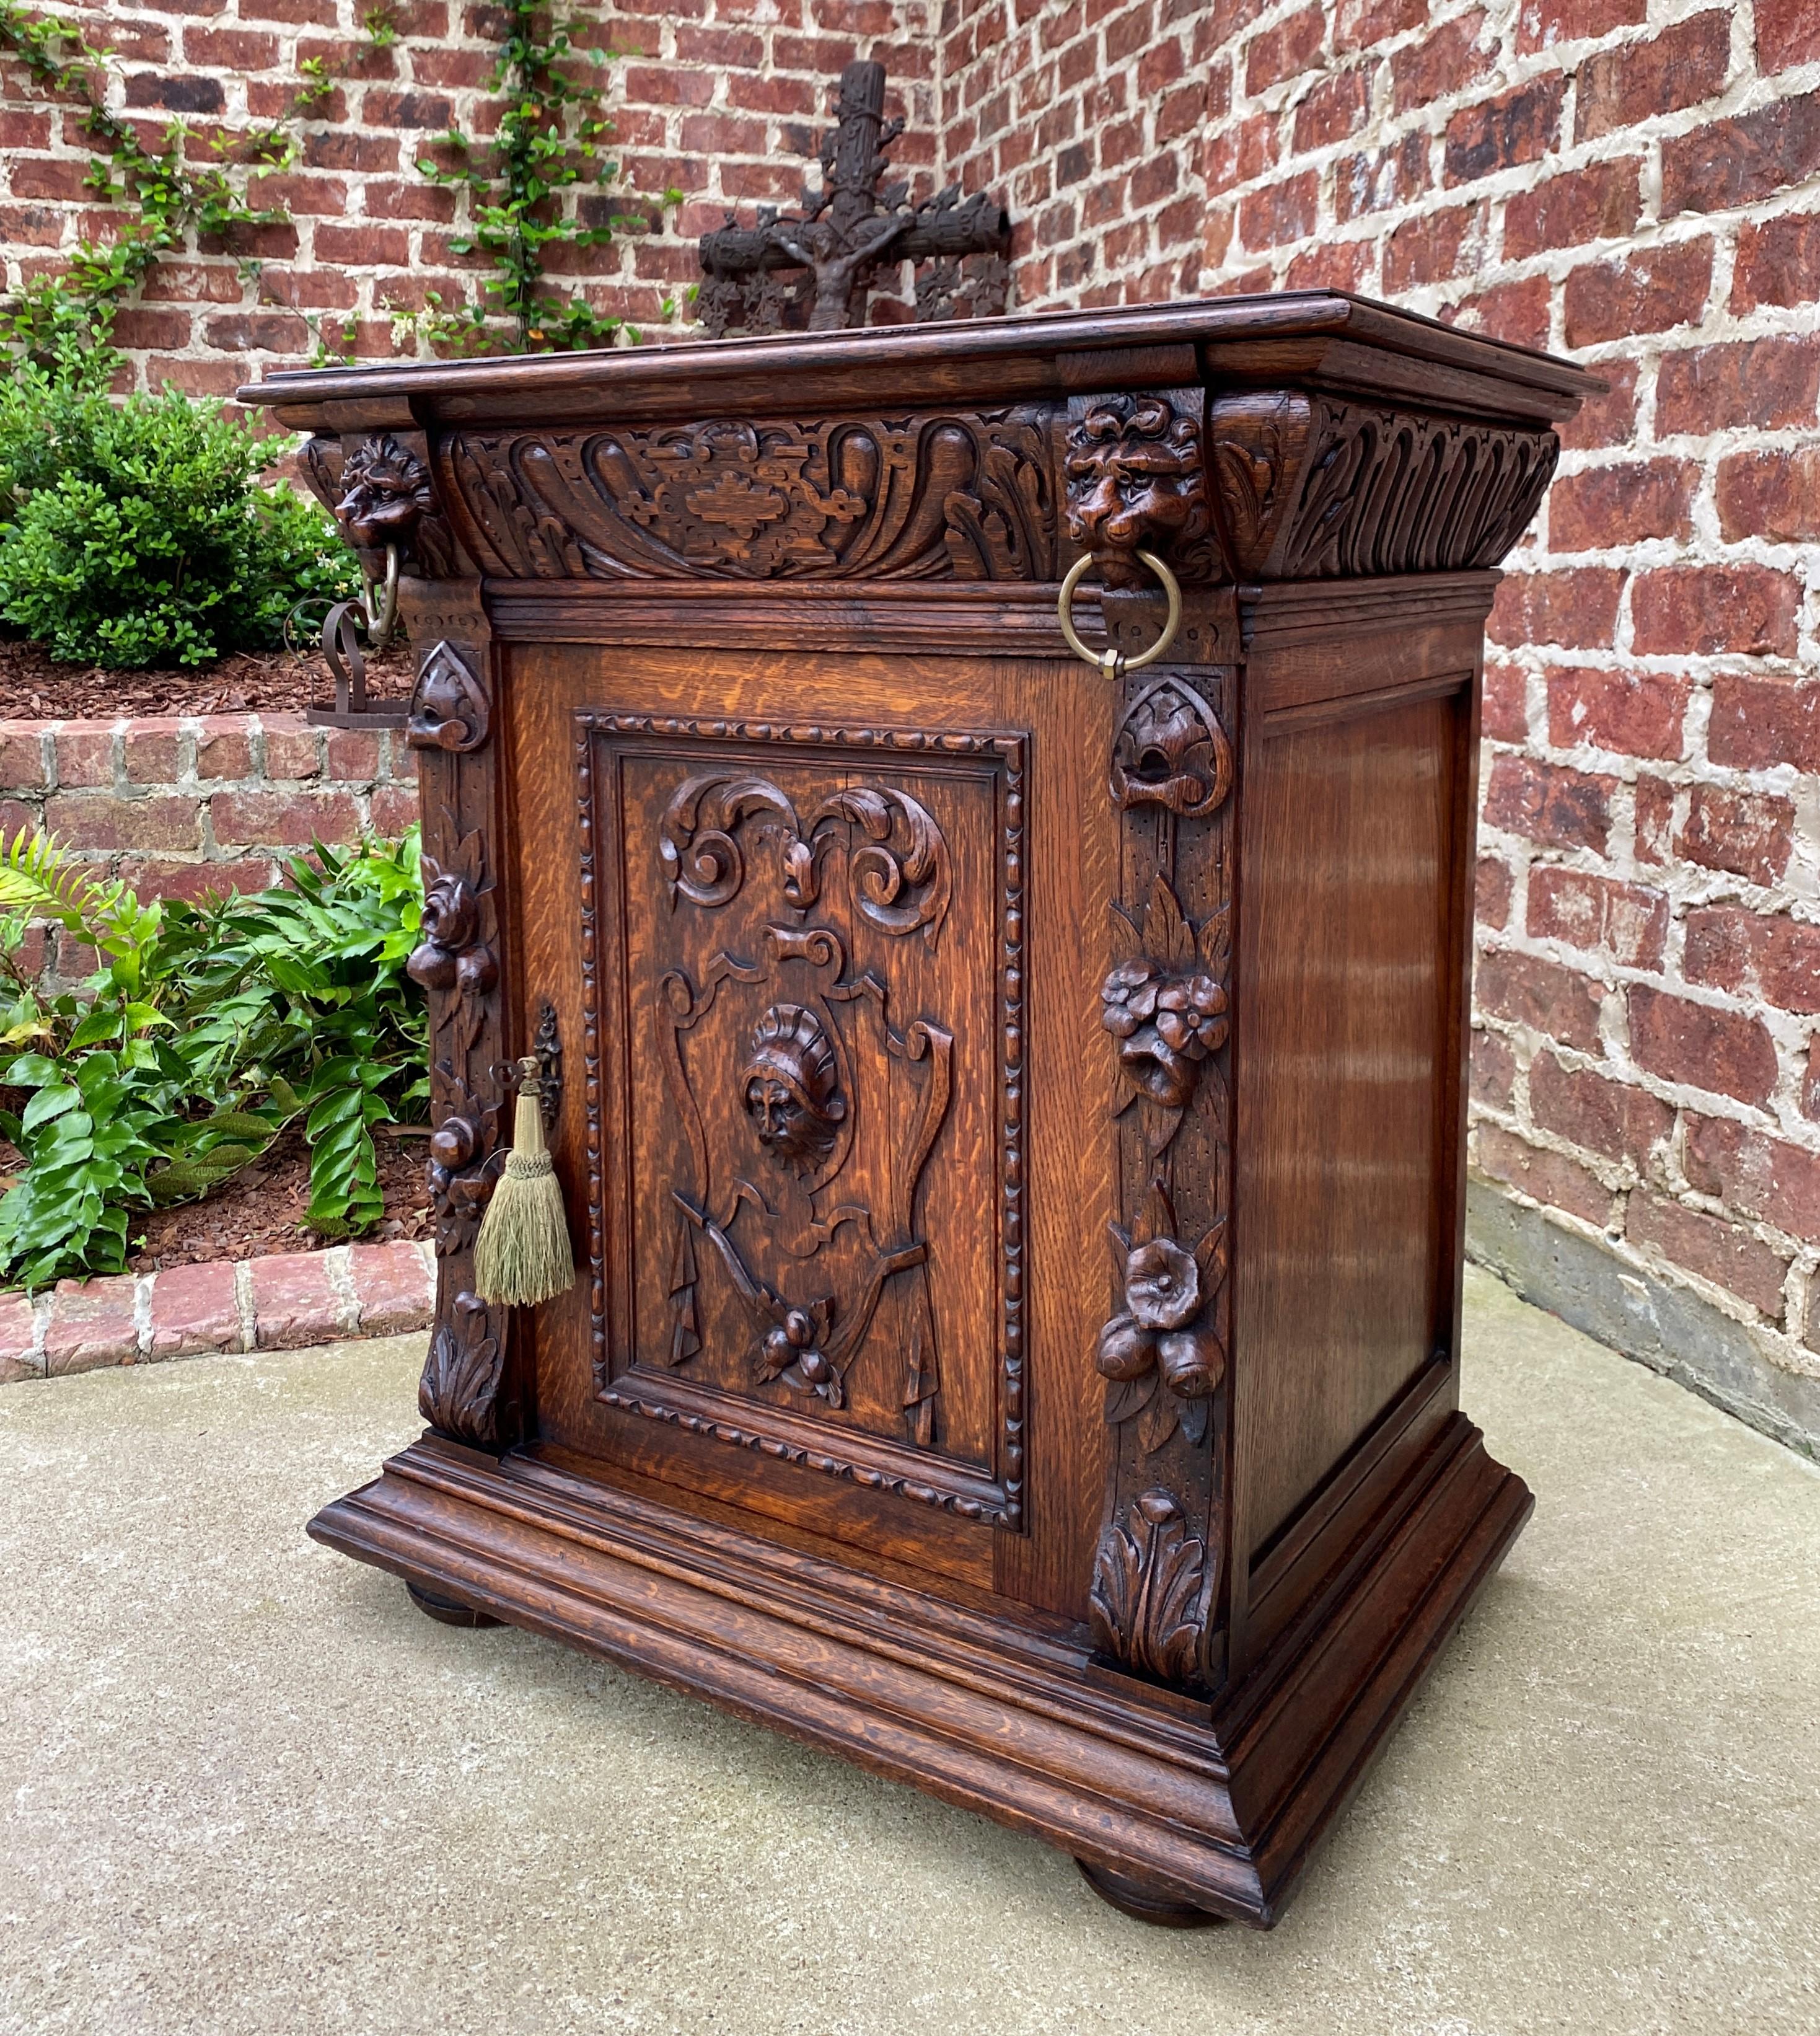 Gorgeous highly carved Antique French oak end table, nightstand, or side cabinet ~~Renaissance Revival
~~c. 1880s

Beautifully carved lion masks with brass rings on corners~~wonderful beveled edge top.

Use as an end table or side cabinet